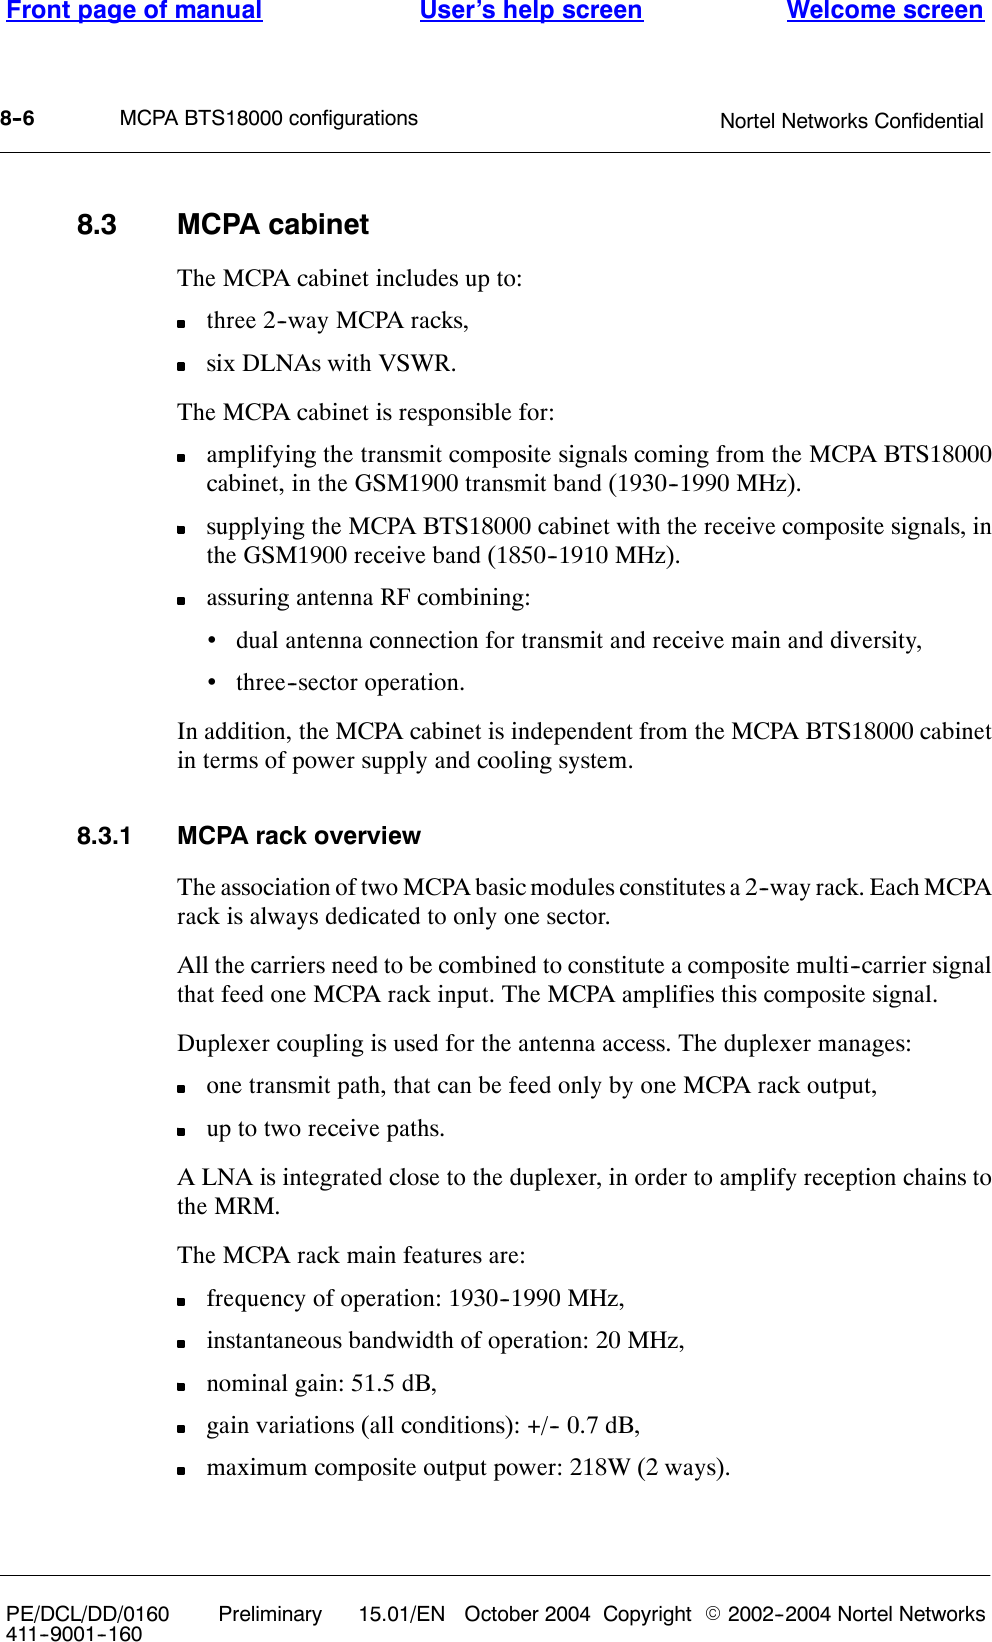 MCPA BTS18000 configurationsFront page of manual Welcome screenUser’s help screenNortel Networks Confidential8--6PE/DCL/DD/0160411--9001--160Preliminary 15.01/EN October 2004 Copyright E2002--2004 Nortel Networks8.3 MCPA cabinetThe MCPA cabinet includes up to:three 2--way MCPA racks,six DLNAs with VSWR.The MCPA cabinet is responsible for:amplifying the transmit composite signals coming from the MCPA BTS18000cabinet, in the GSM1900 transmit band (1930--1990 MHz).supplying the MCPA BTS18000 cabinet with the receive composite signals, inthe GSM1900 receive band (1850--1910 MHz).assuring antenna RF combining:•dual antenna connection for transmit and receive main and diversity,•three--sector operation.In addition, the MCPA cabinet is independent from the MCPA BTS18000 cabinetin terms of power supply and cooling system.8.3.1 MCPA rack overviewThe association of two MCPA basic modules constitutes a 2--way rack. Each MCPArack is always dedicated to only one sector.All the carriers need to be combined to constitute a composite multi--carrier signalthat feed one MCPA rack input. The MCPA amplifies this composite signal.Duplexer coupling is used for the antenna access. The duplexer manages:one transmit path, that can be feed only by one MCPA rack output,up to two receive paths.A LNA is integrated close to the duplexer, in order to amplify reception chains tothe MRM.The MCPA rack main features are:frequency of operation: 1930--1990 MHz,instantaneous bandwidth of operation: 20 MHz,nominal gain: 51.5 dB,gain variations (all conditions): +/-- 0.7 dB,maximum composite output power: 218W (2 ways).